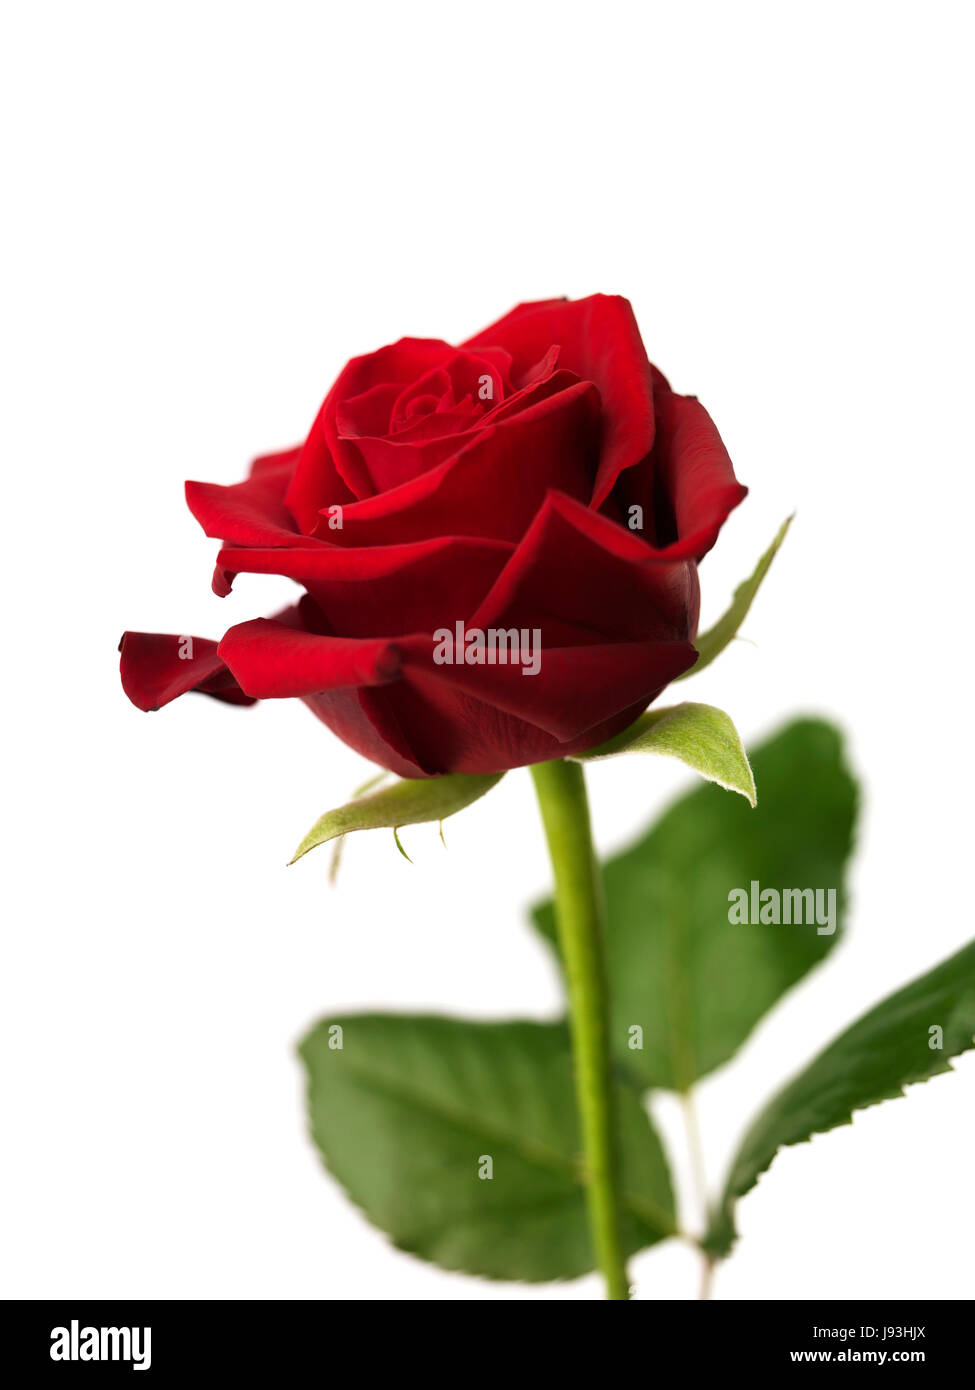 isolated, flower, rose, plant, green, love, in love, fell in love, red,  nature Stock Photo - Alamy